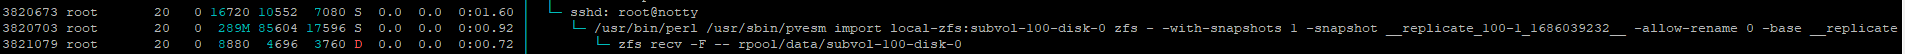 zfs recv.png